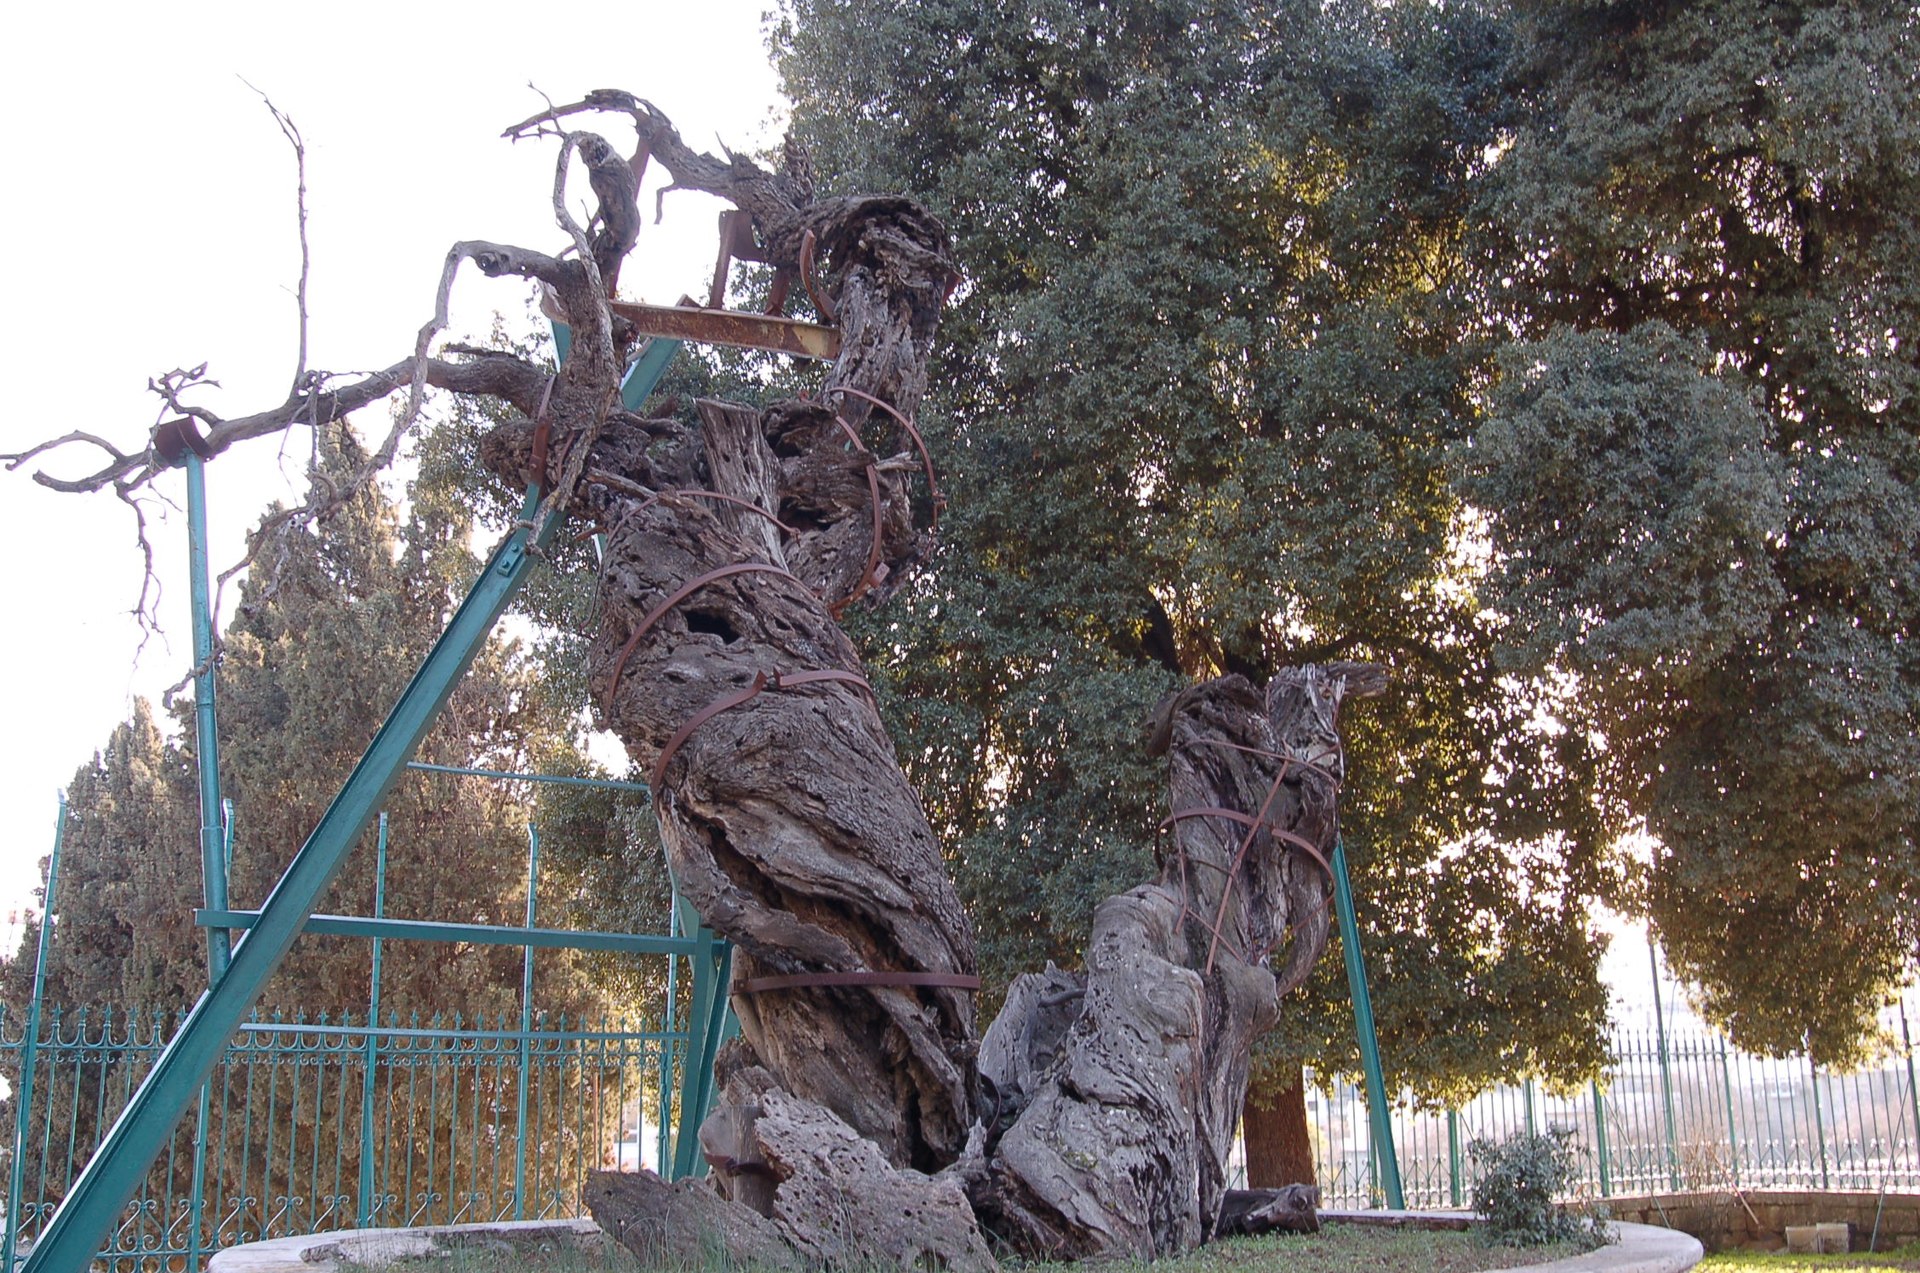 The Oak of Mamre in 2008, before collapsing in 2019